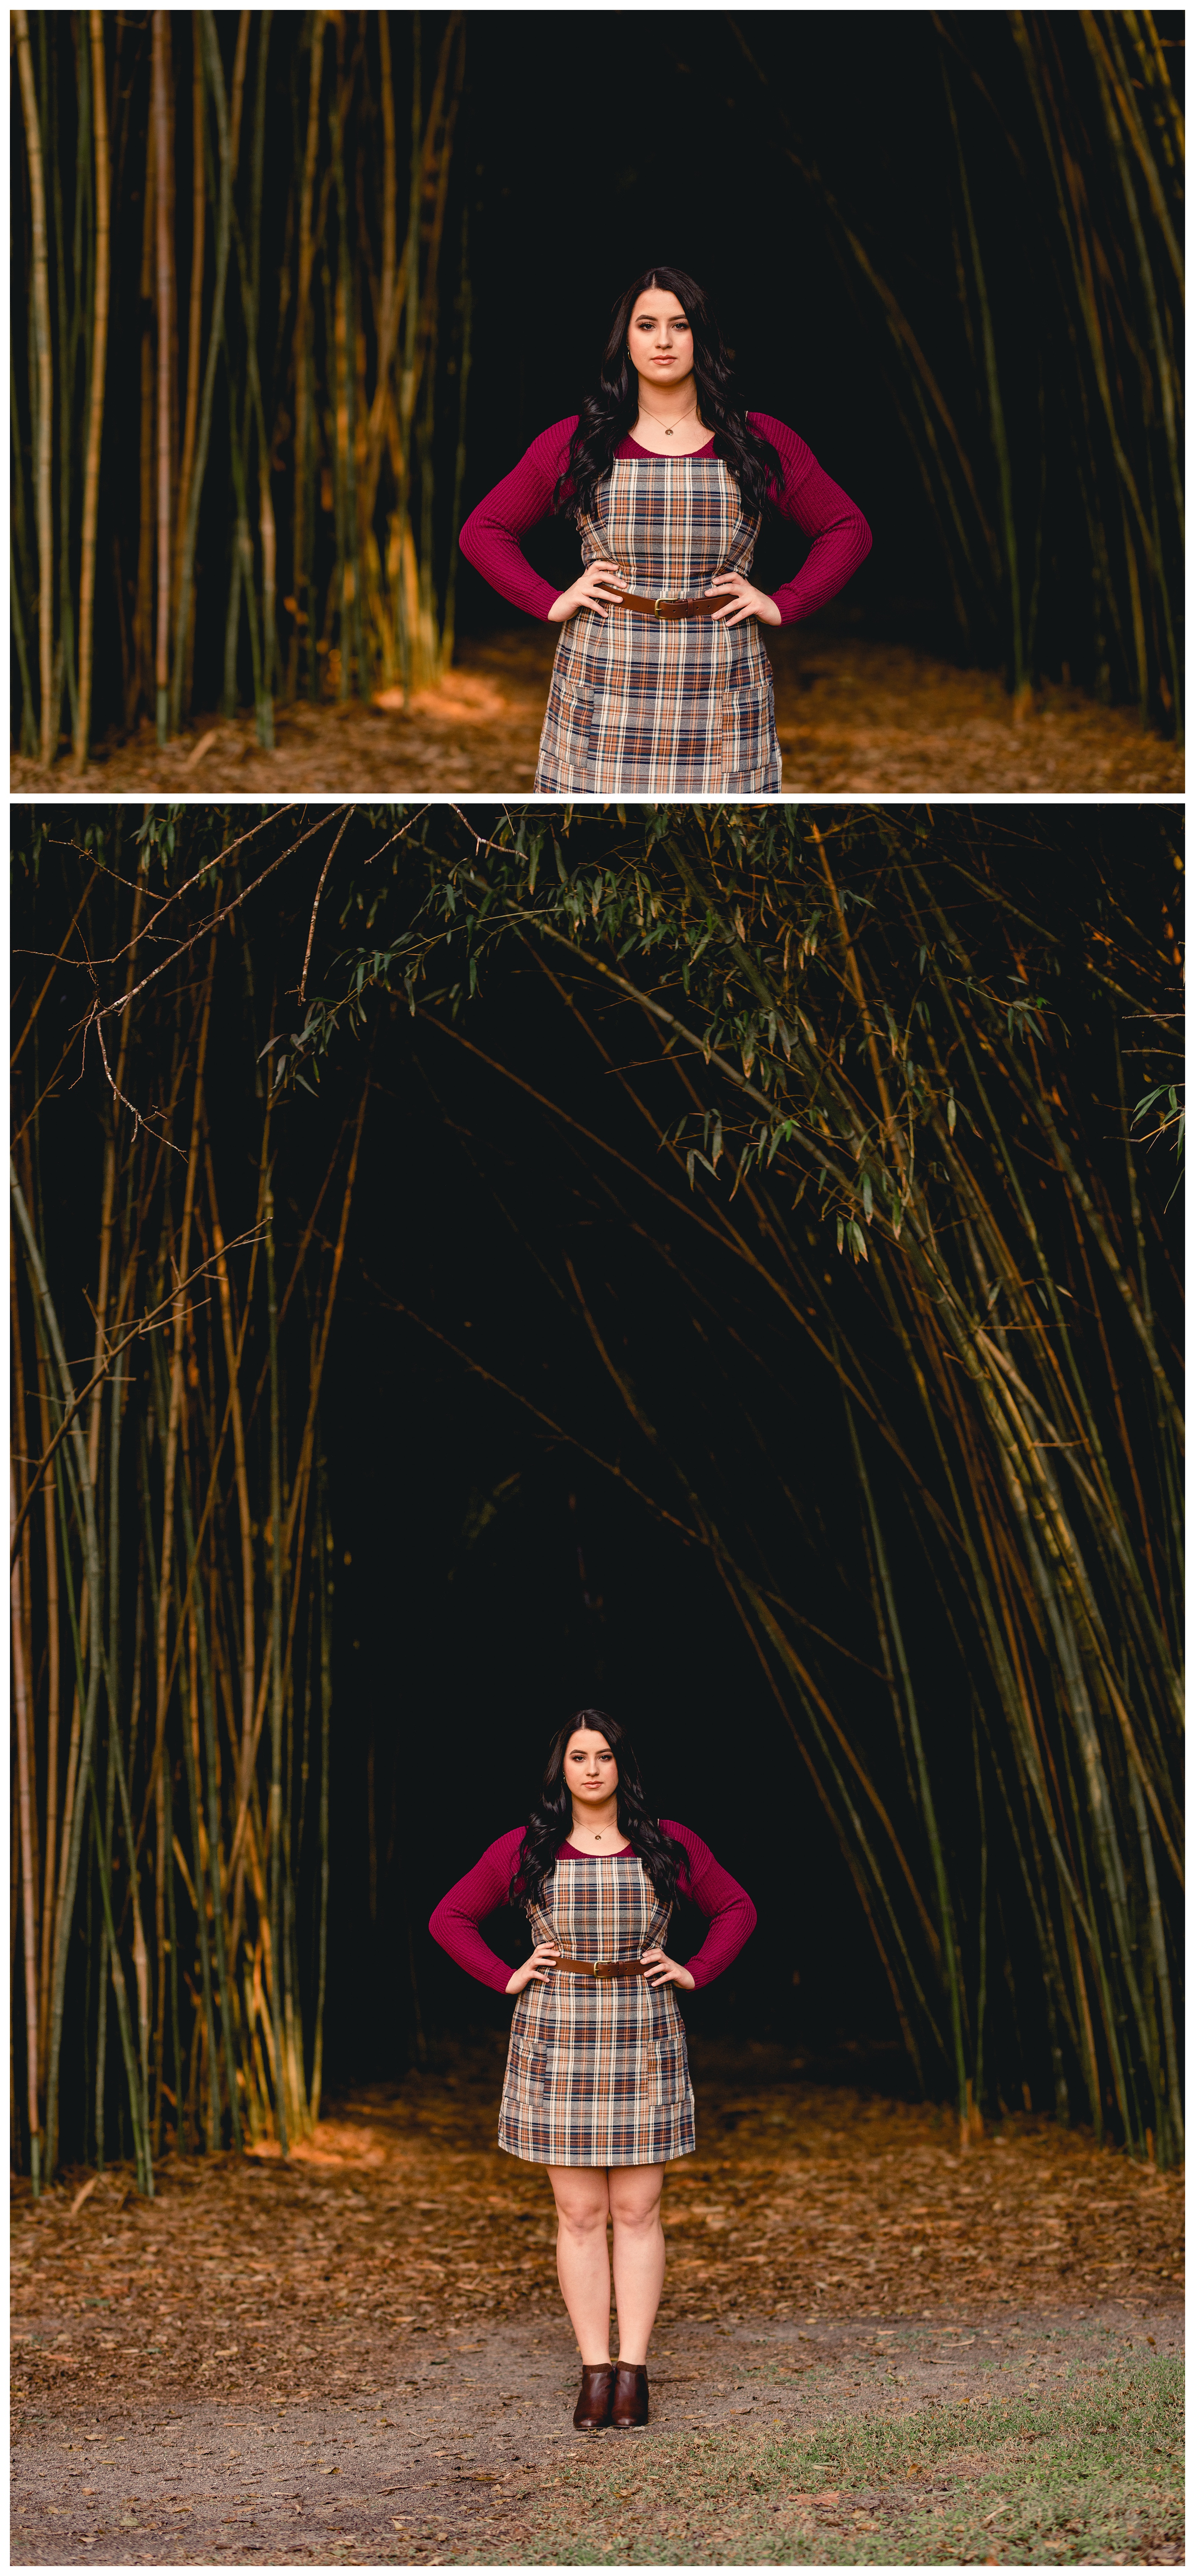 Bamboo brings different atmosphere to high school senior pictures. Taken by professional senior photographer Shelly Williams.